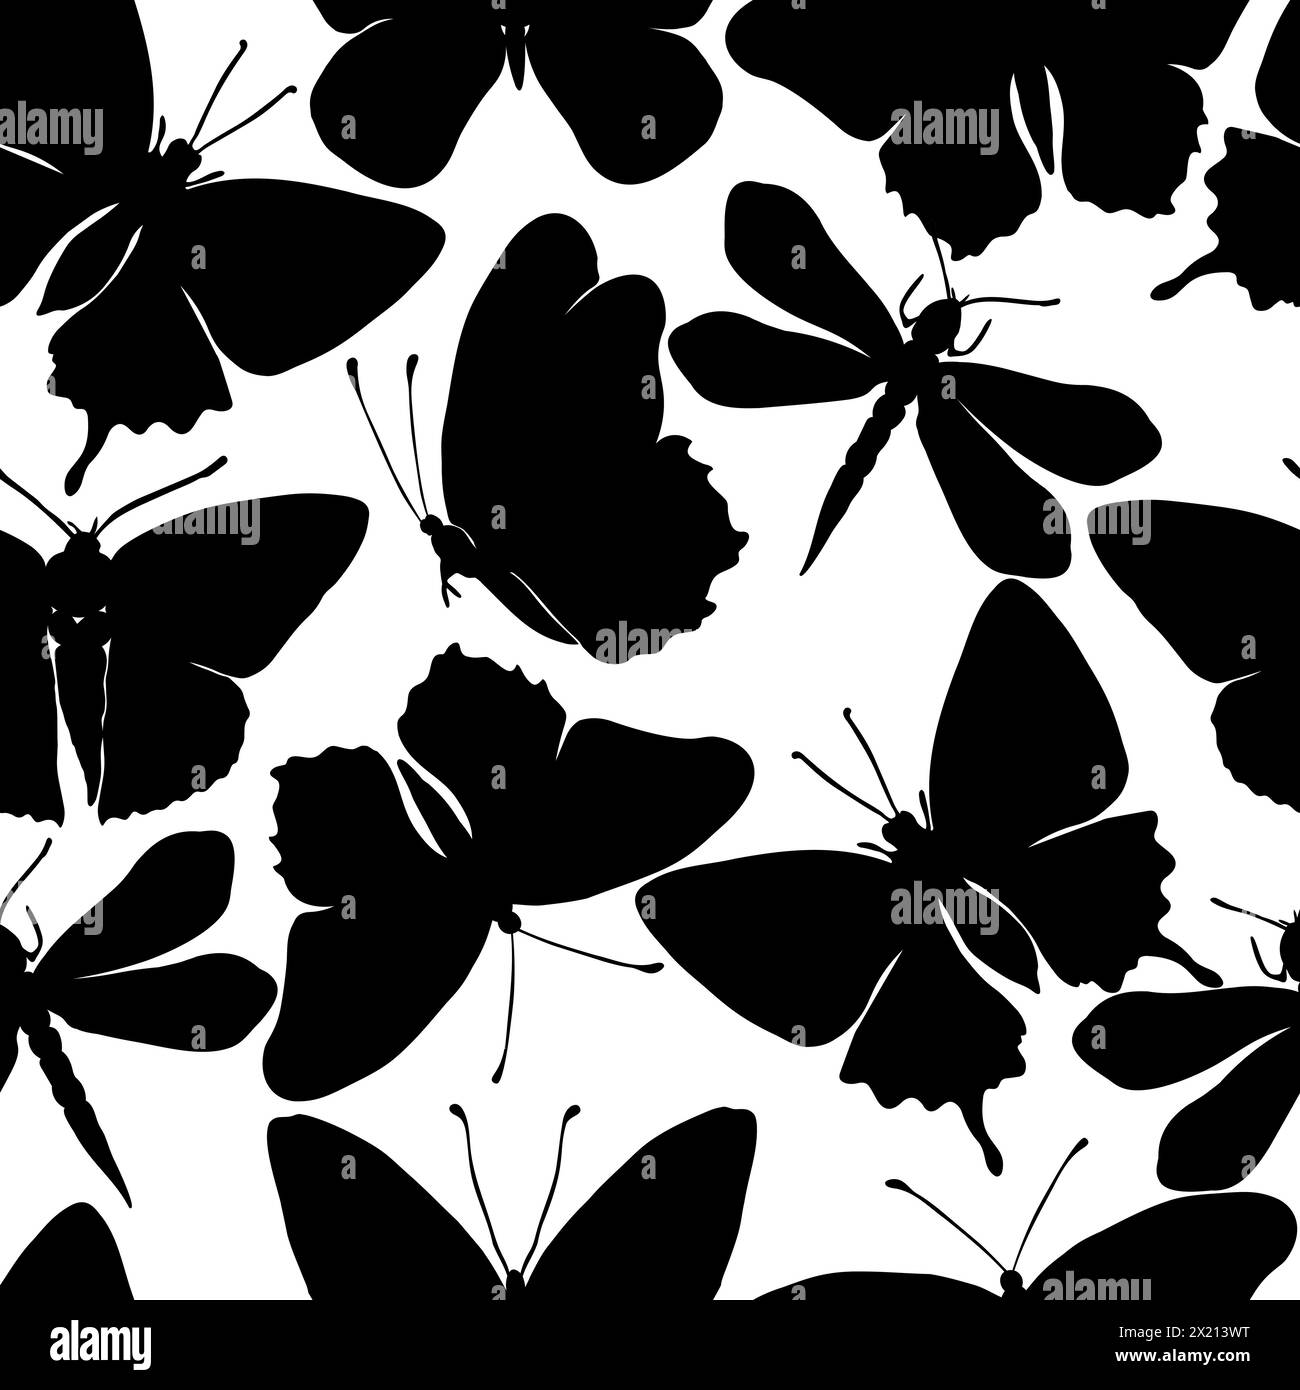 Butterflies silhouette vector seamless pattern background for textile, fabric, wallpaper, scrapbook. Insects with wings drawing for surface design. Stock Vector